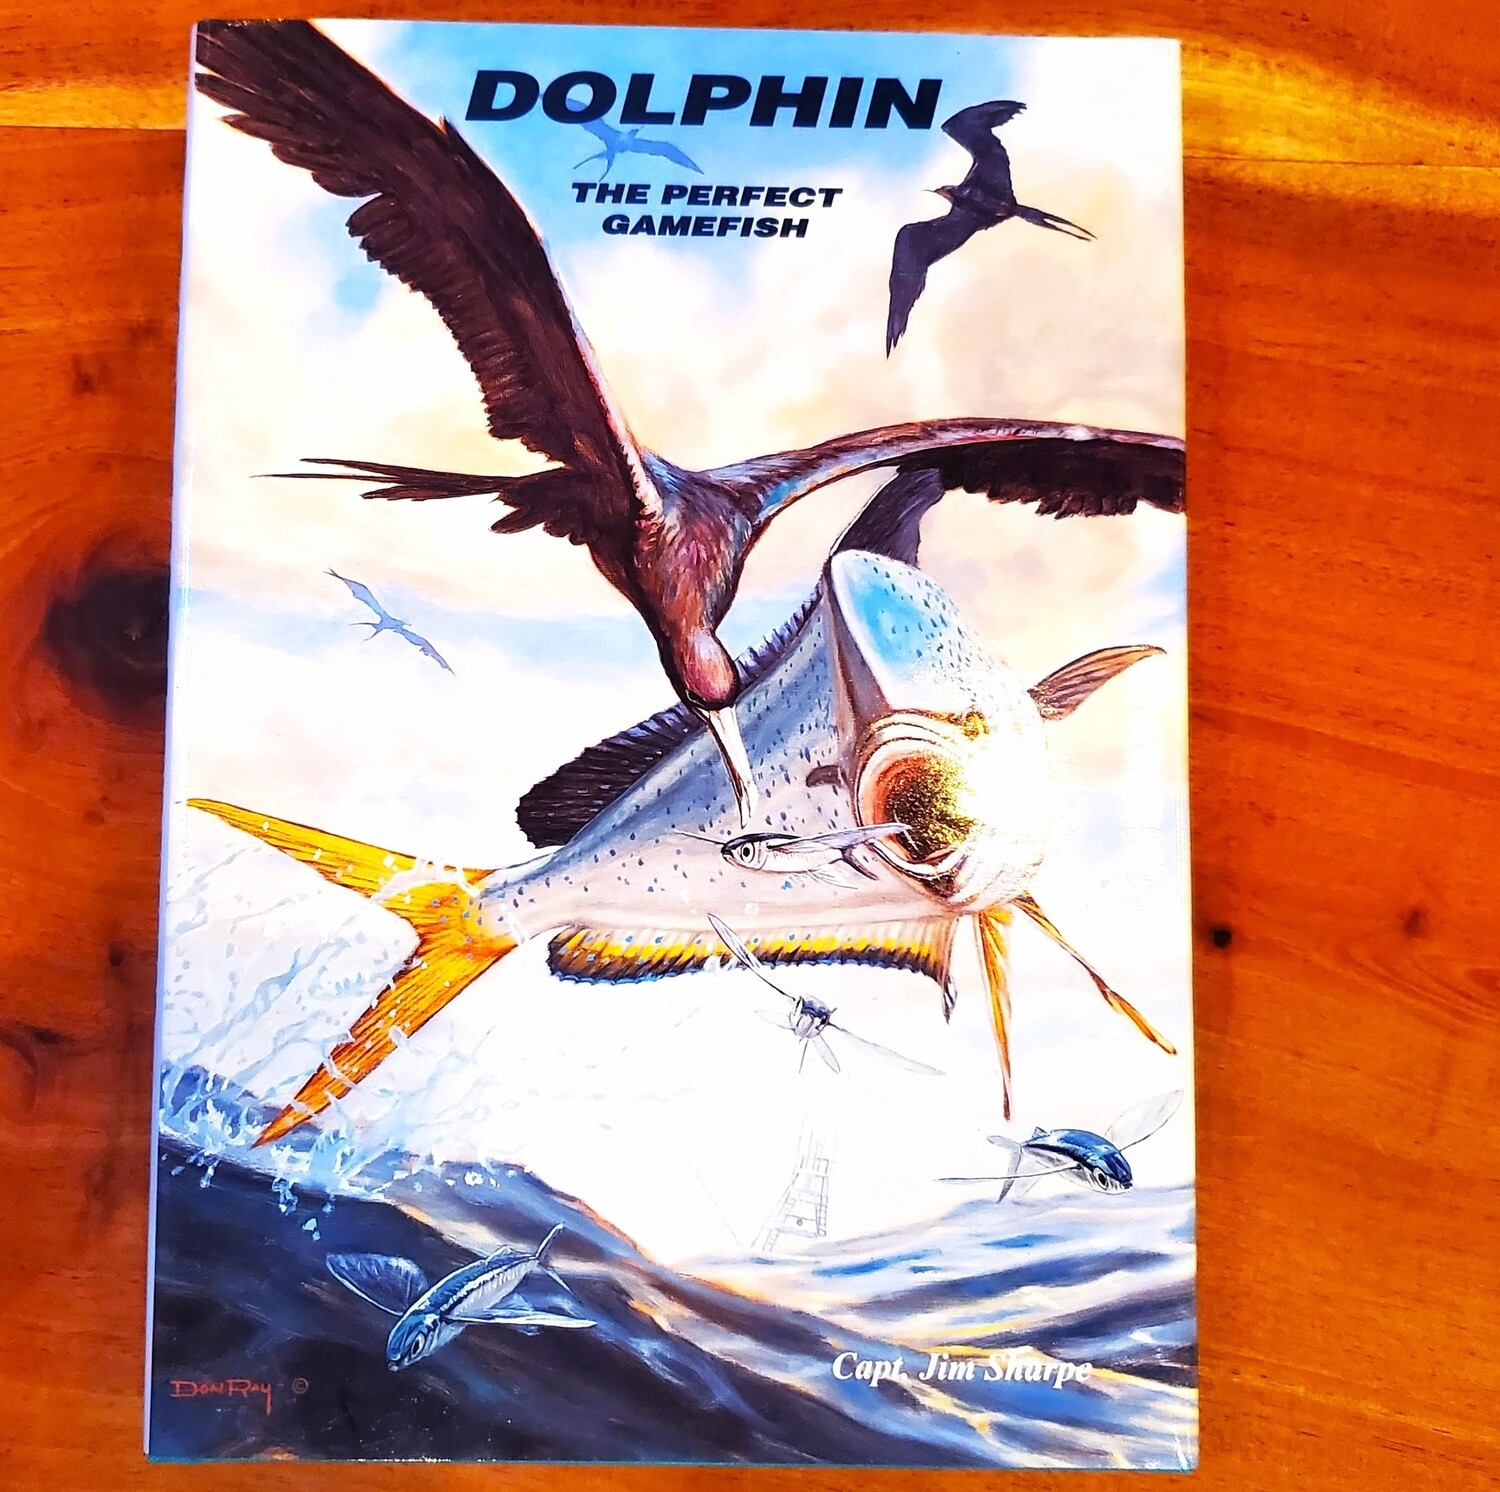 Dolphin - The Perfect Gamefish